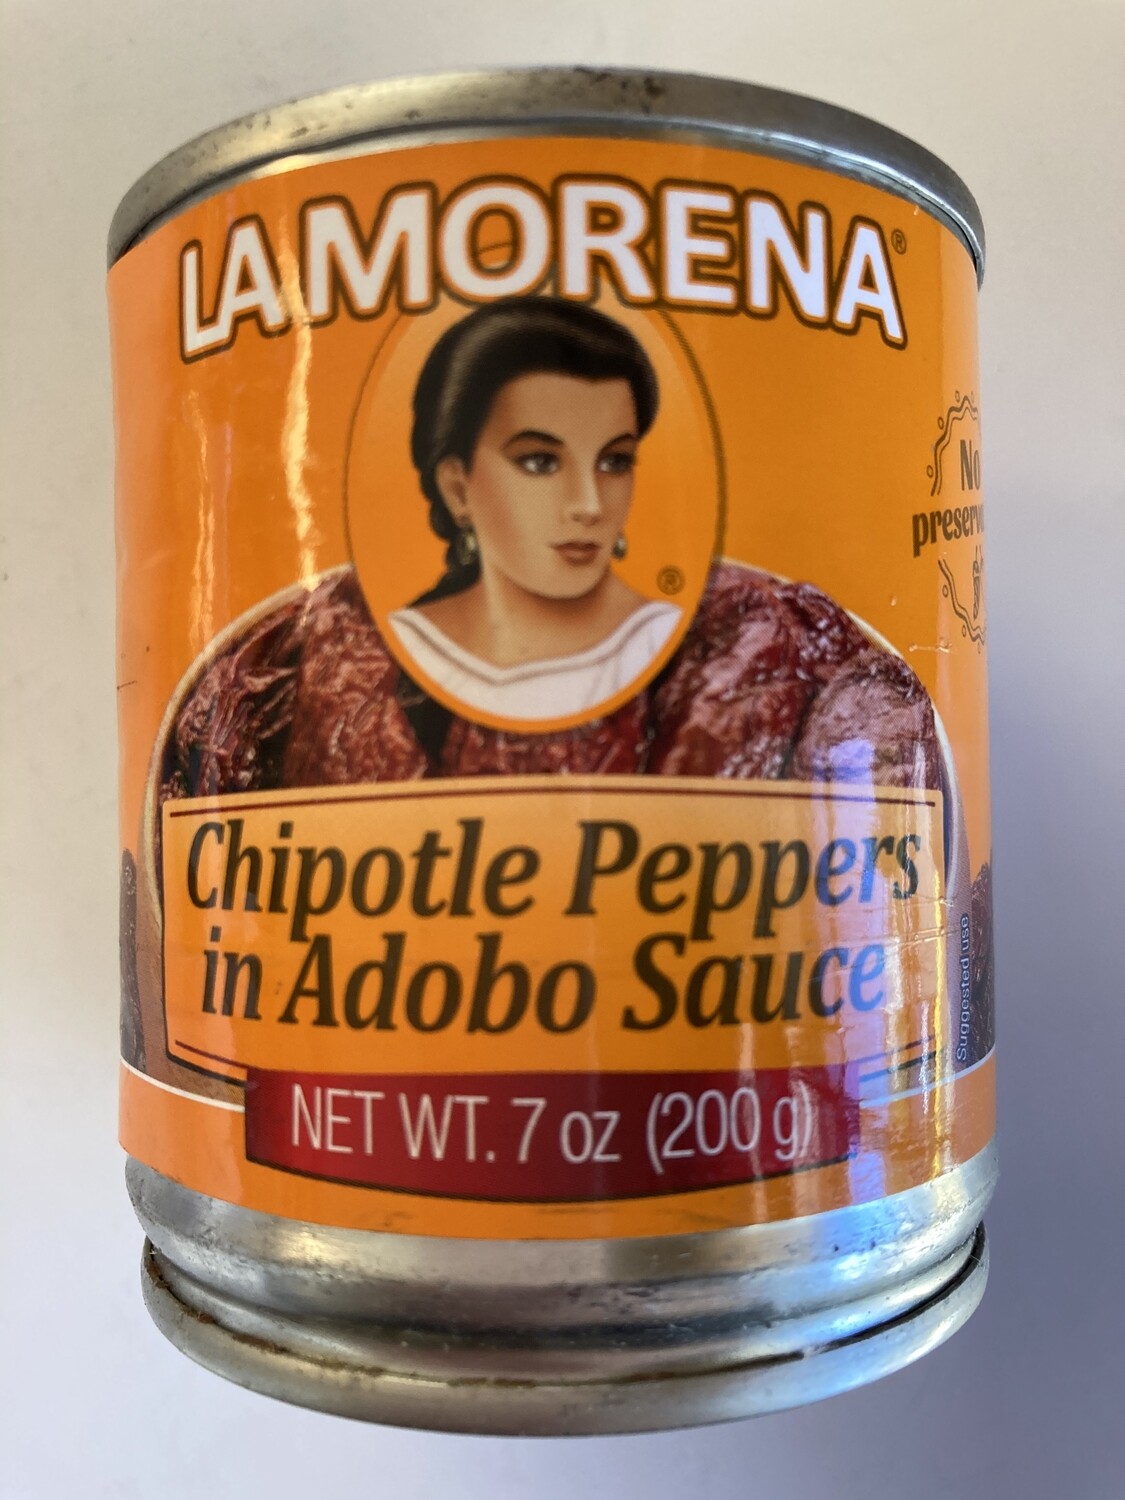 La Morena Chipotle Peppers in Adobo Sauce Hot 200 g